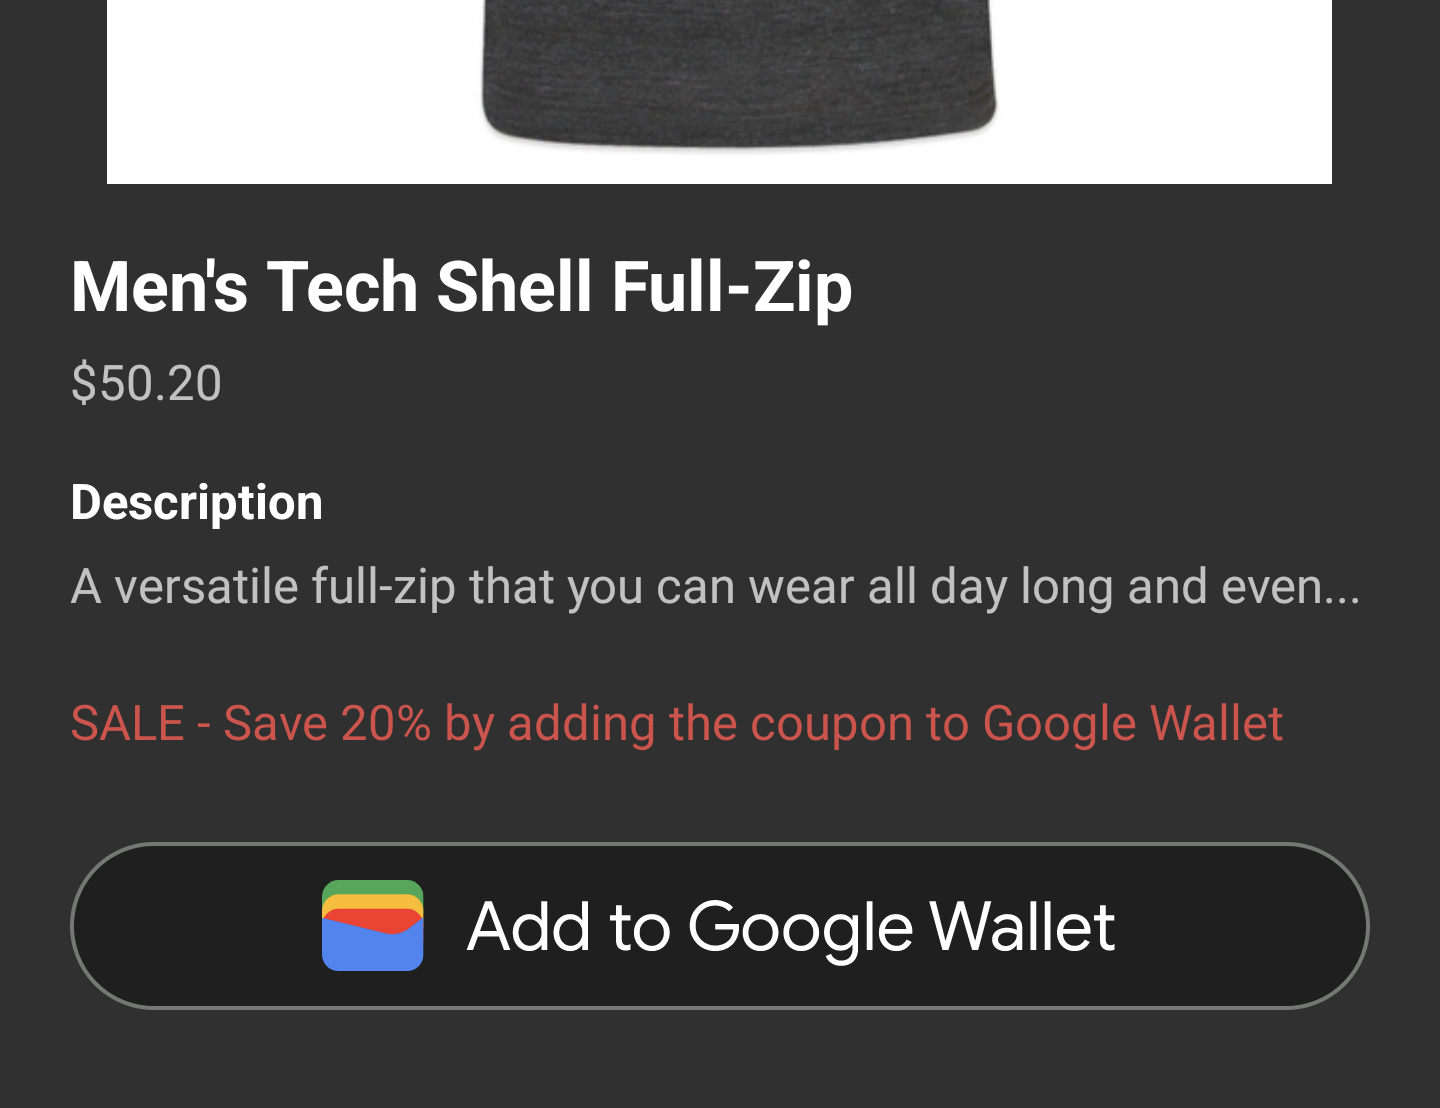 The Add to Google Wallet button now appears in the app activity